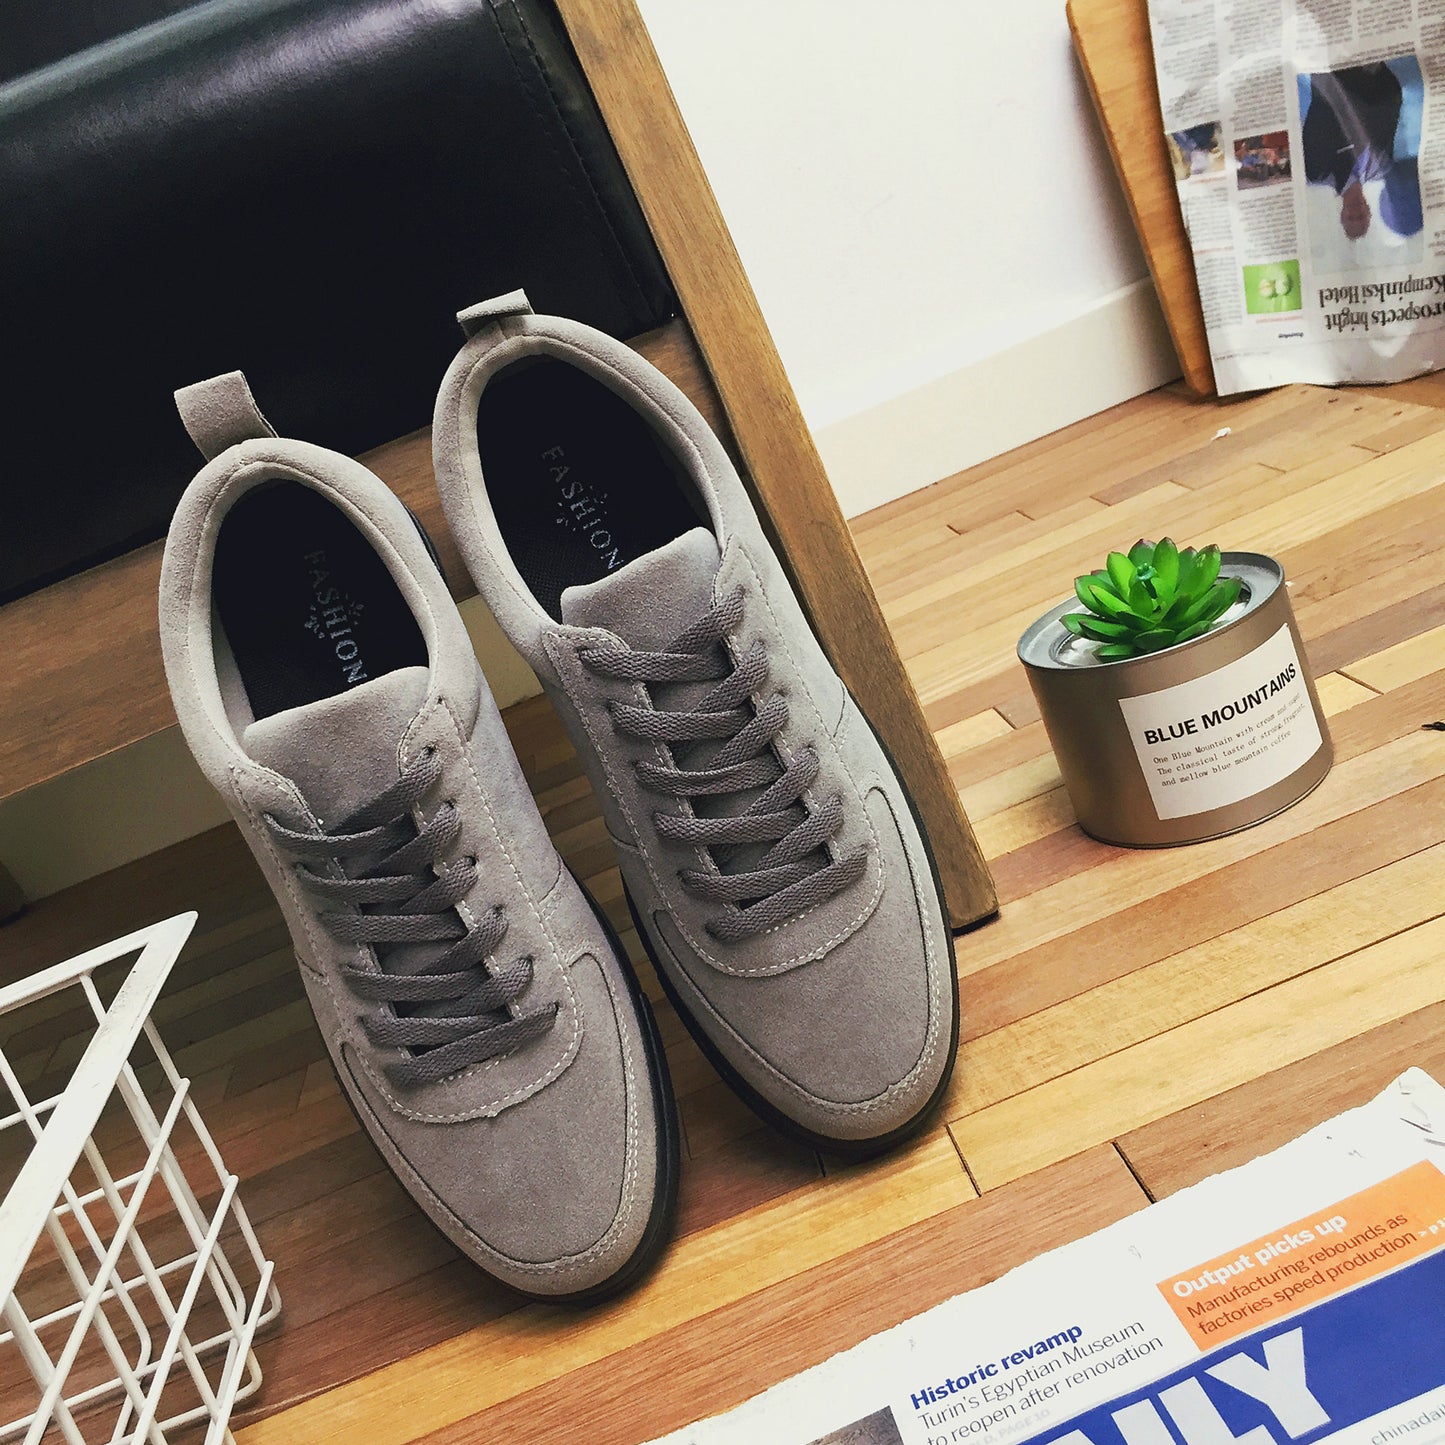 New Low Shoes To Help Students Trend Of Korean Men's Casual Retro Harajuku Youthflat Matte